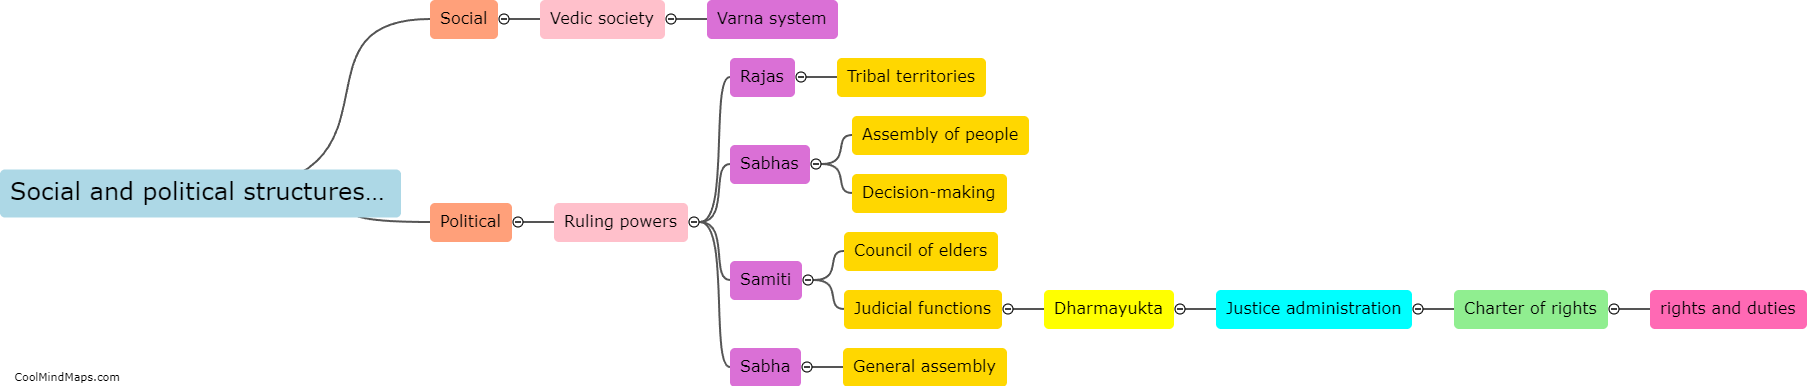 What were the social and political structures during the Vedic age?